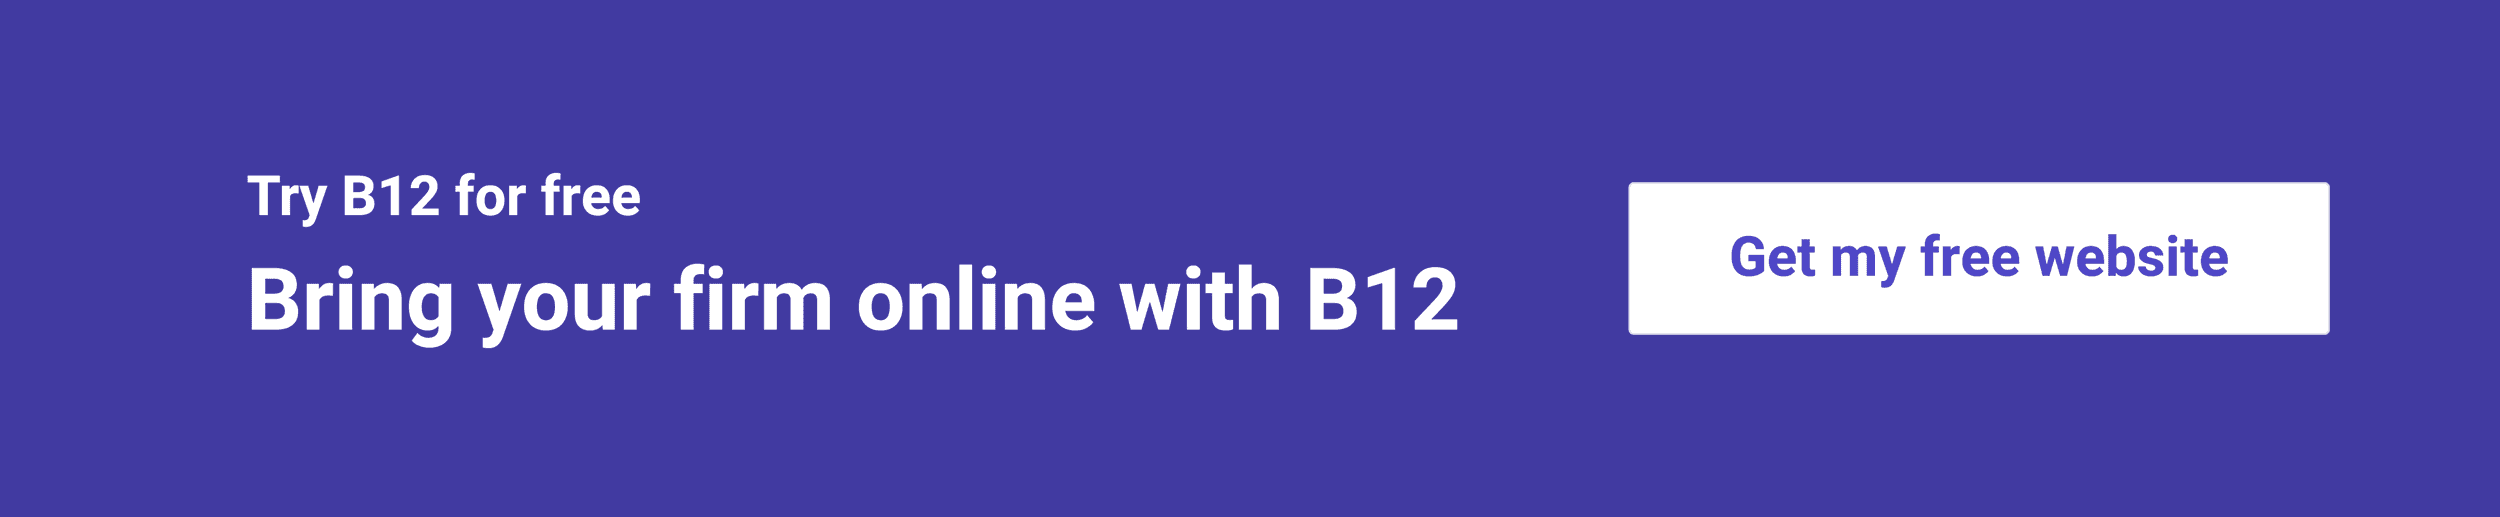 Bring my firm online with B12 banner